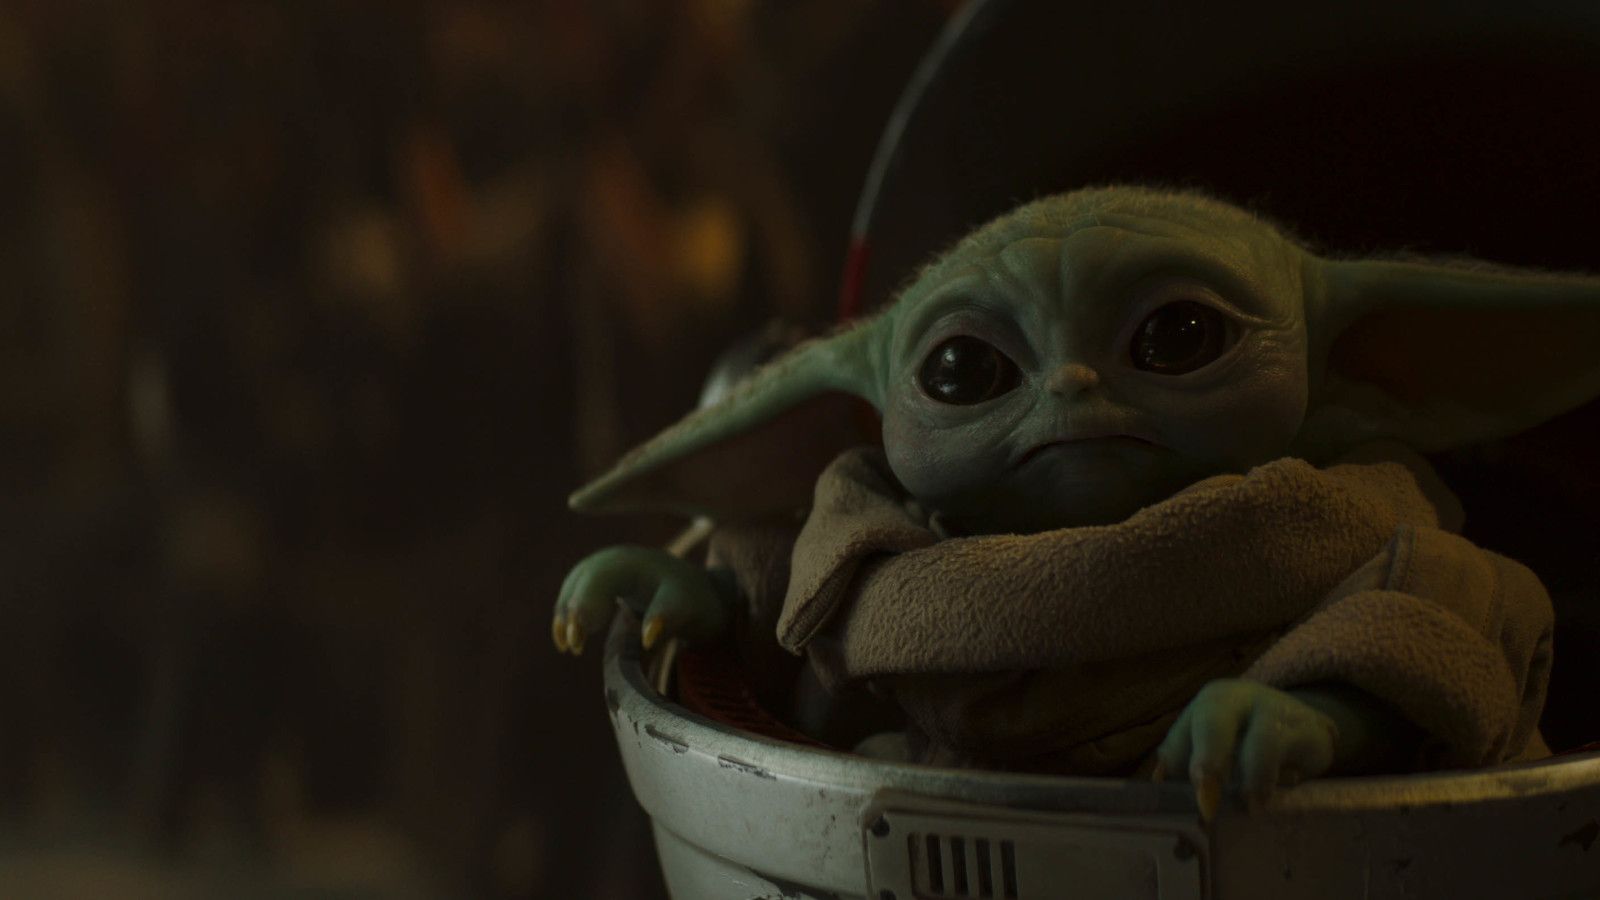 Baby Yoda creates a lightsaber with Luke in new official Star Wars poster